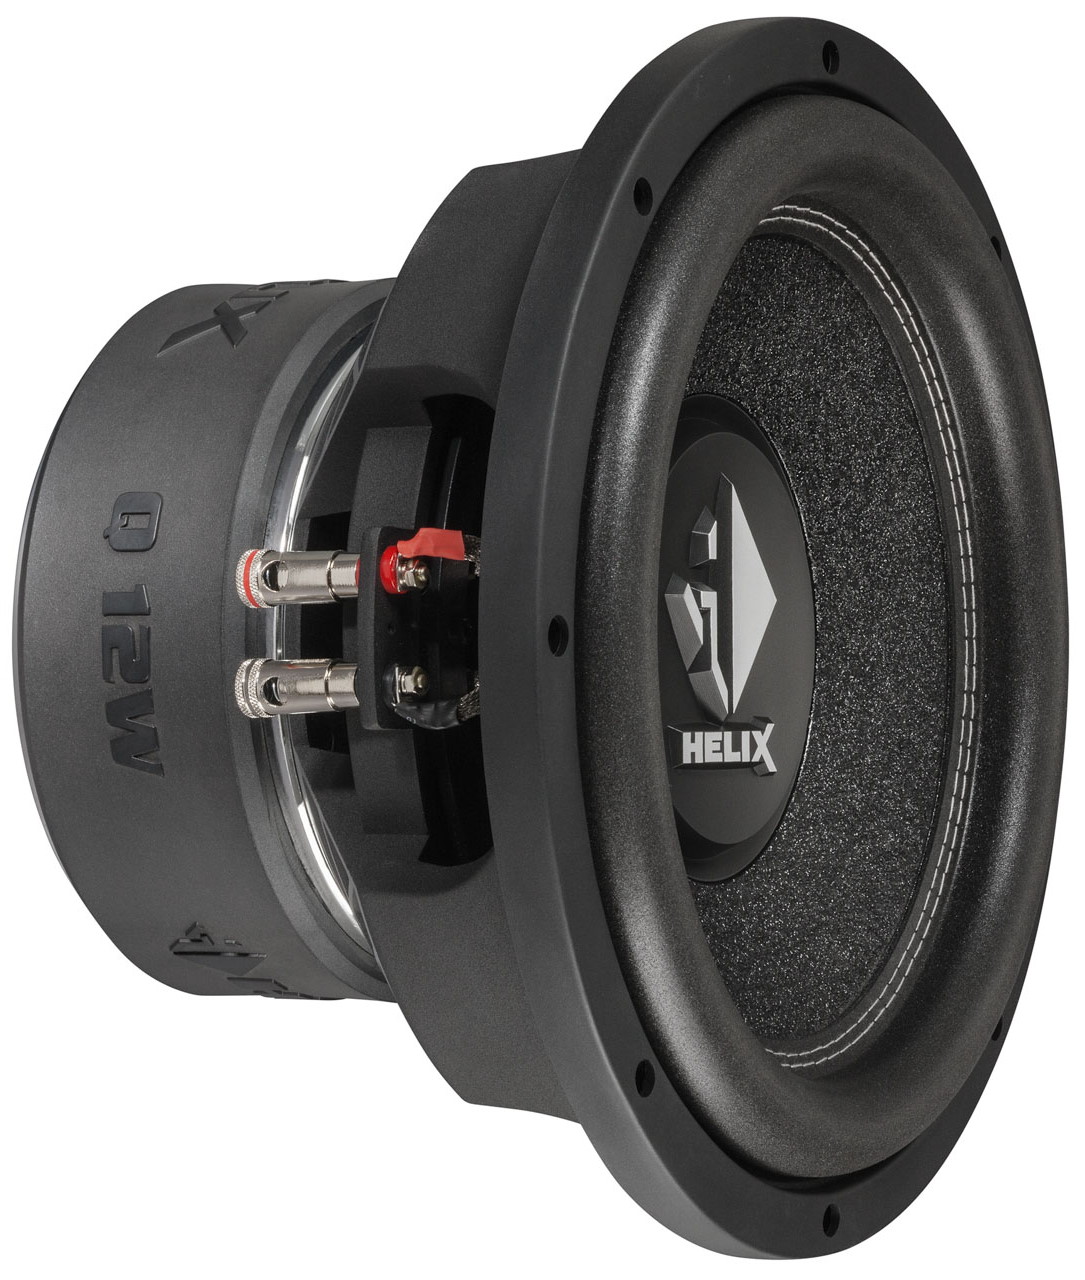 HELIX Q 12W, Subwoofer Chassis, 300 mm